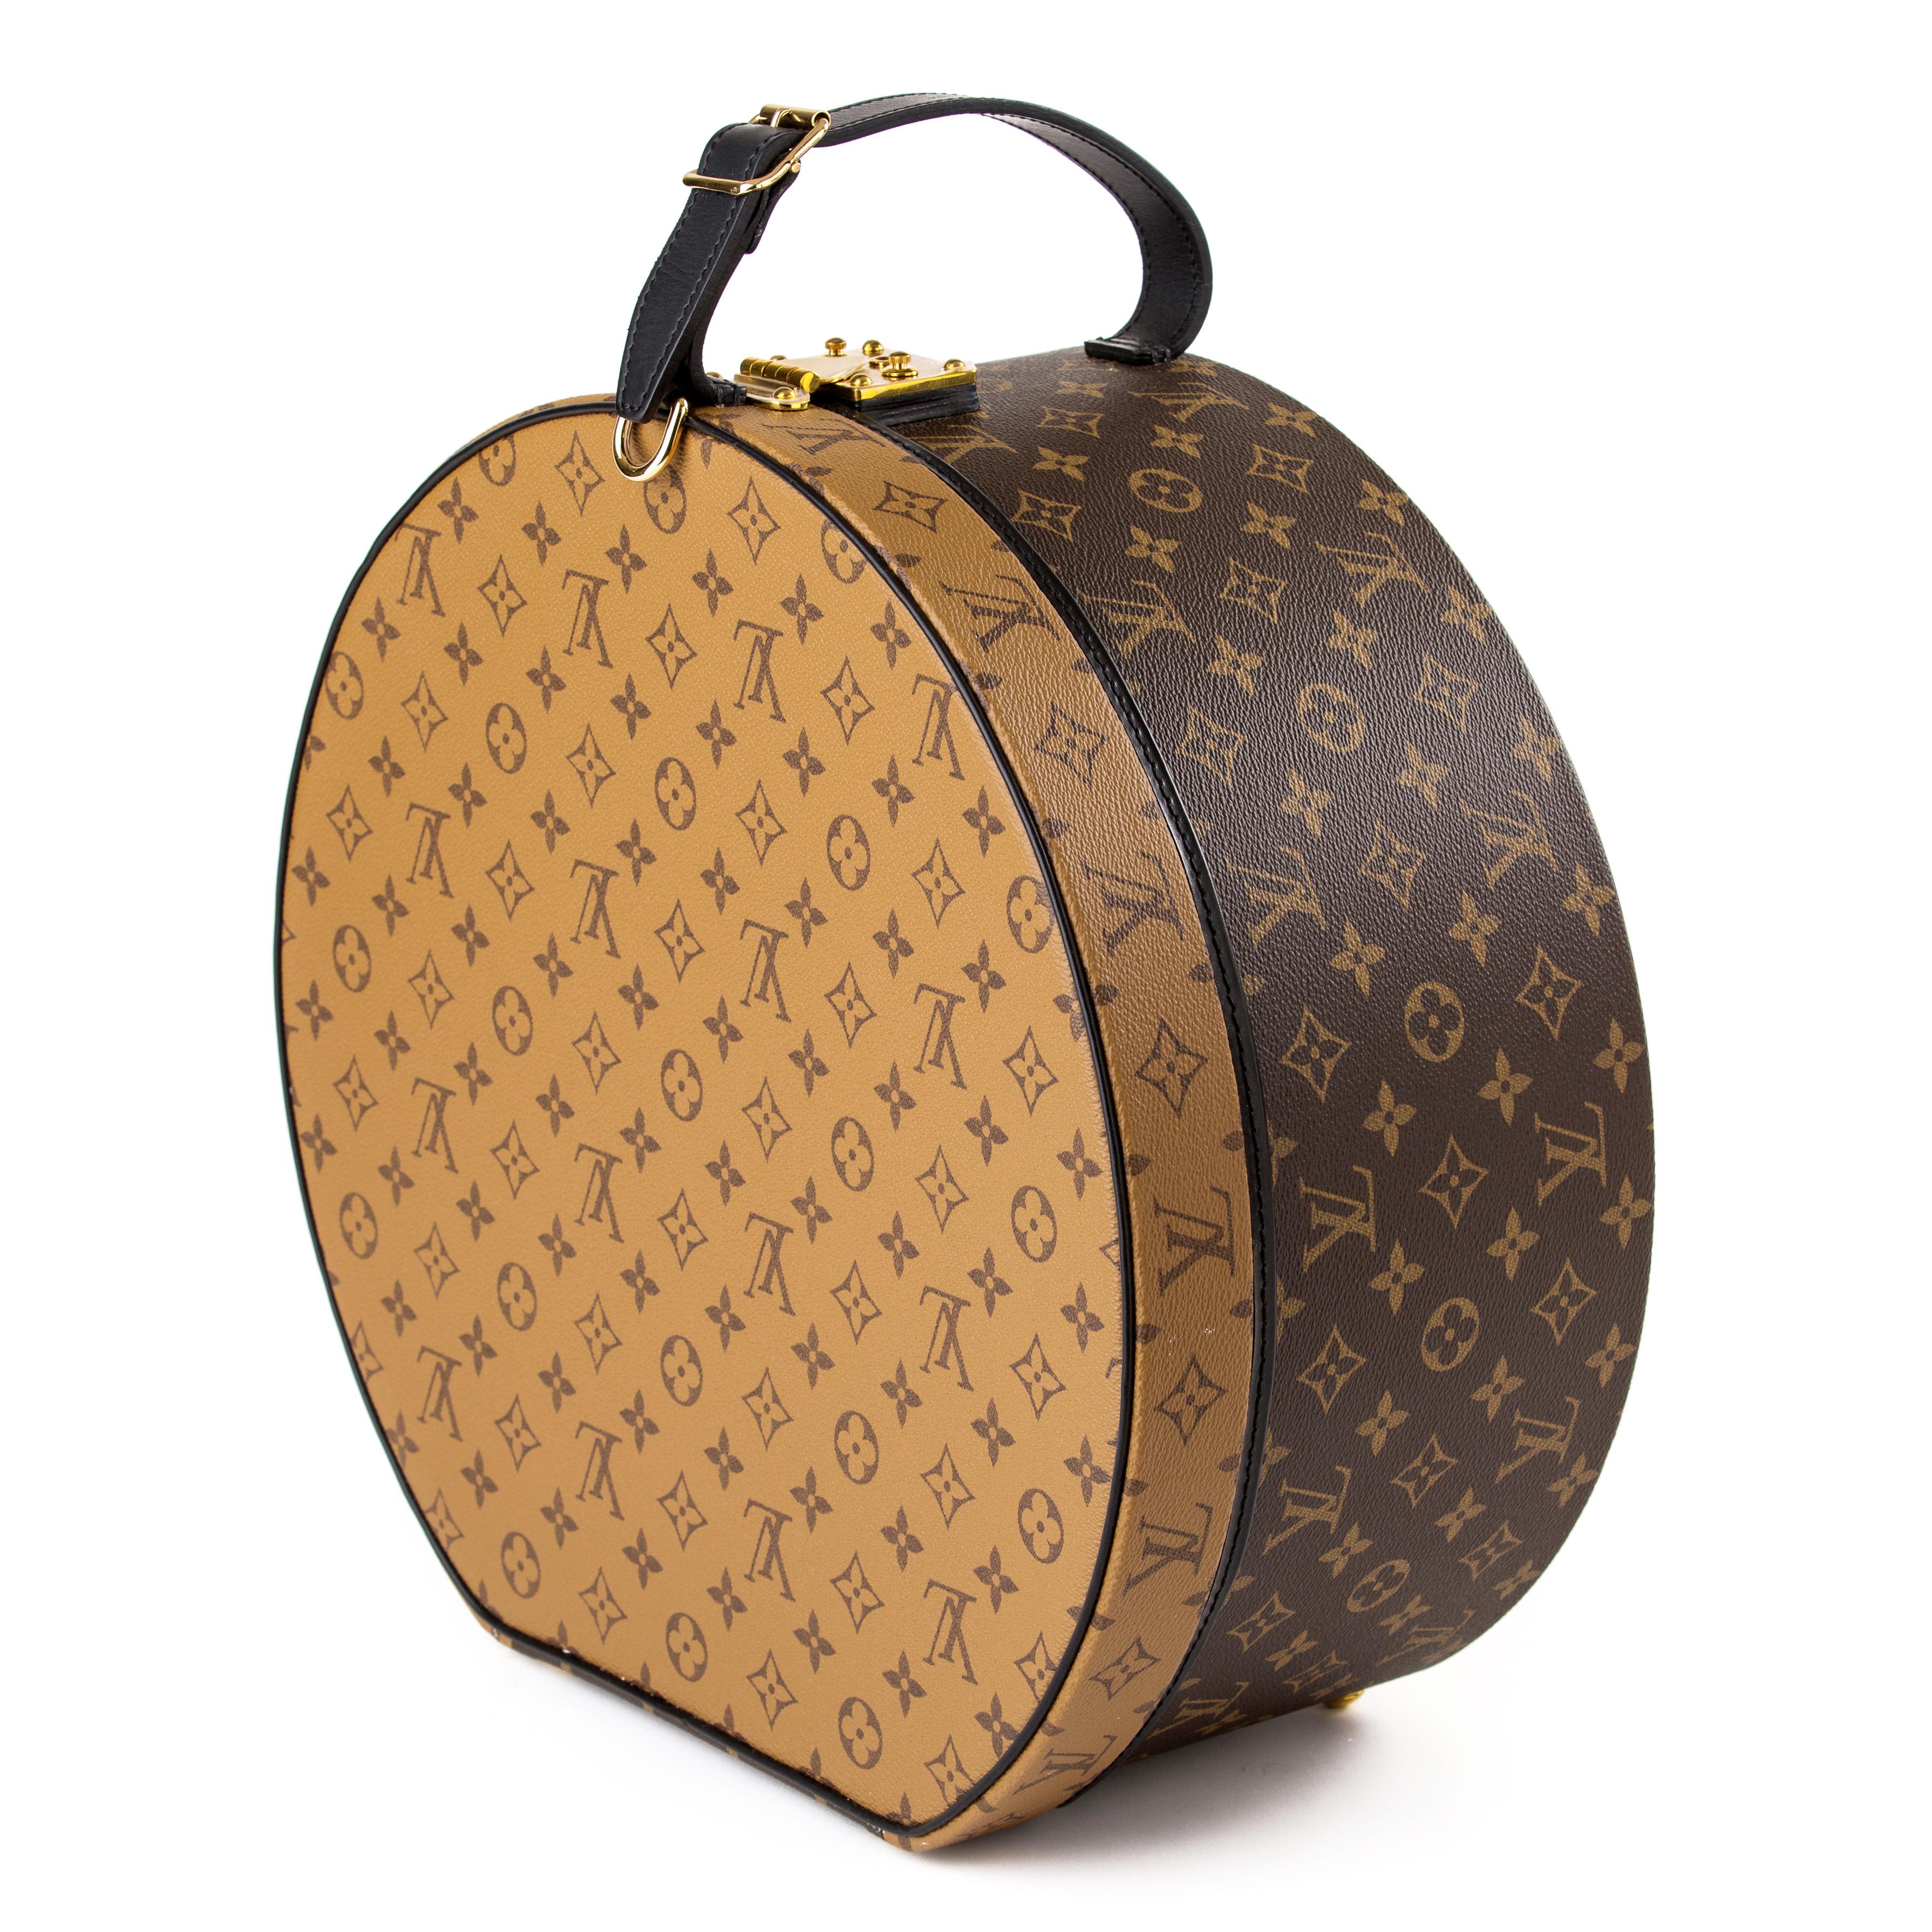 Louis Vuitton reverse monogram hat box.

Very rare item.
Featured a reserve monogram lid.
The hat box features brass hardware and black leather trim.
 